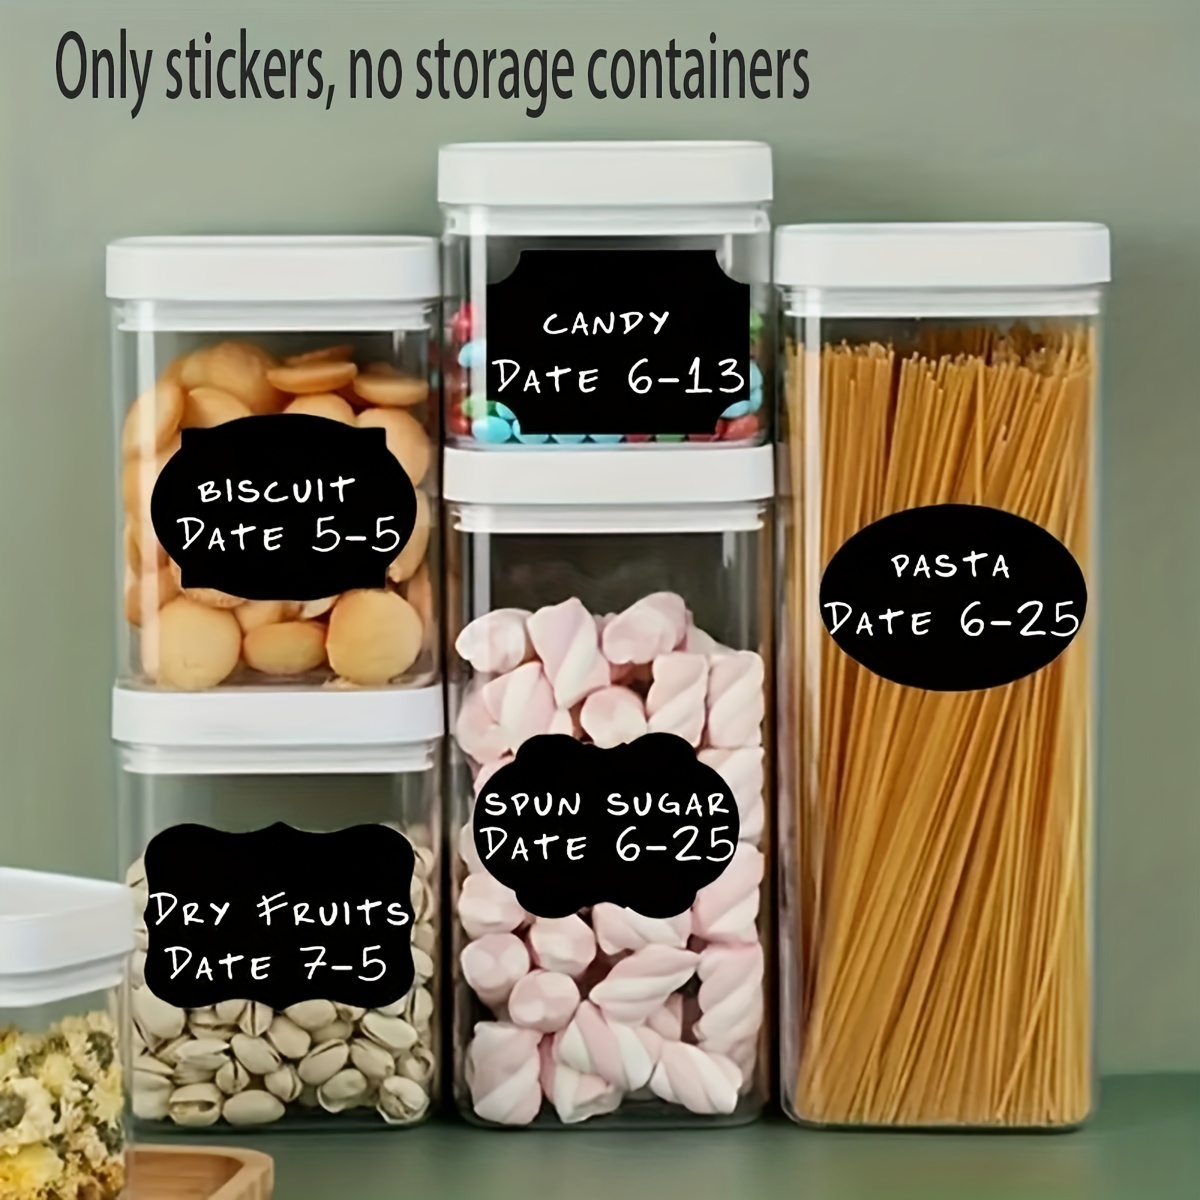 

36pcs Reusable Food Storage Container Labels With Pen - Waterproof, Glue-free, Self-adhesive, Blackboard Sticker For Spices, Cheese, And More - Kitchen Accessories